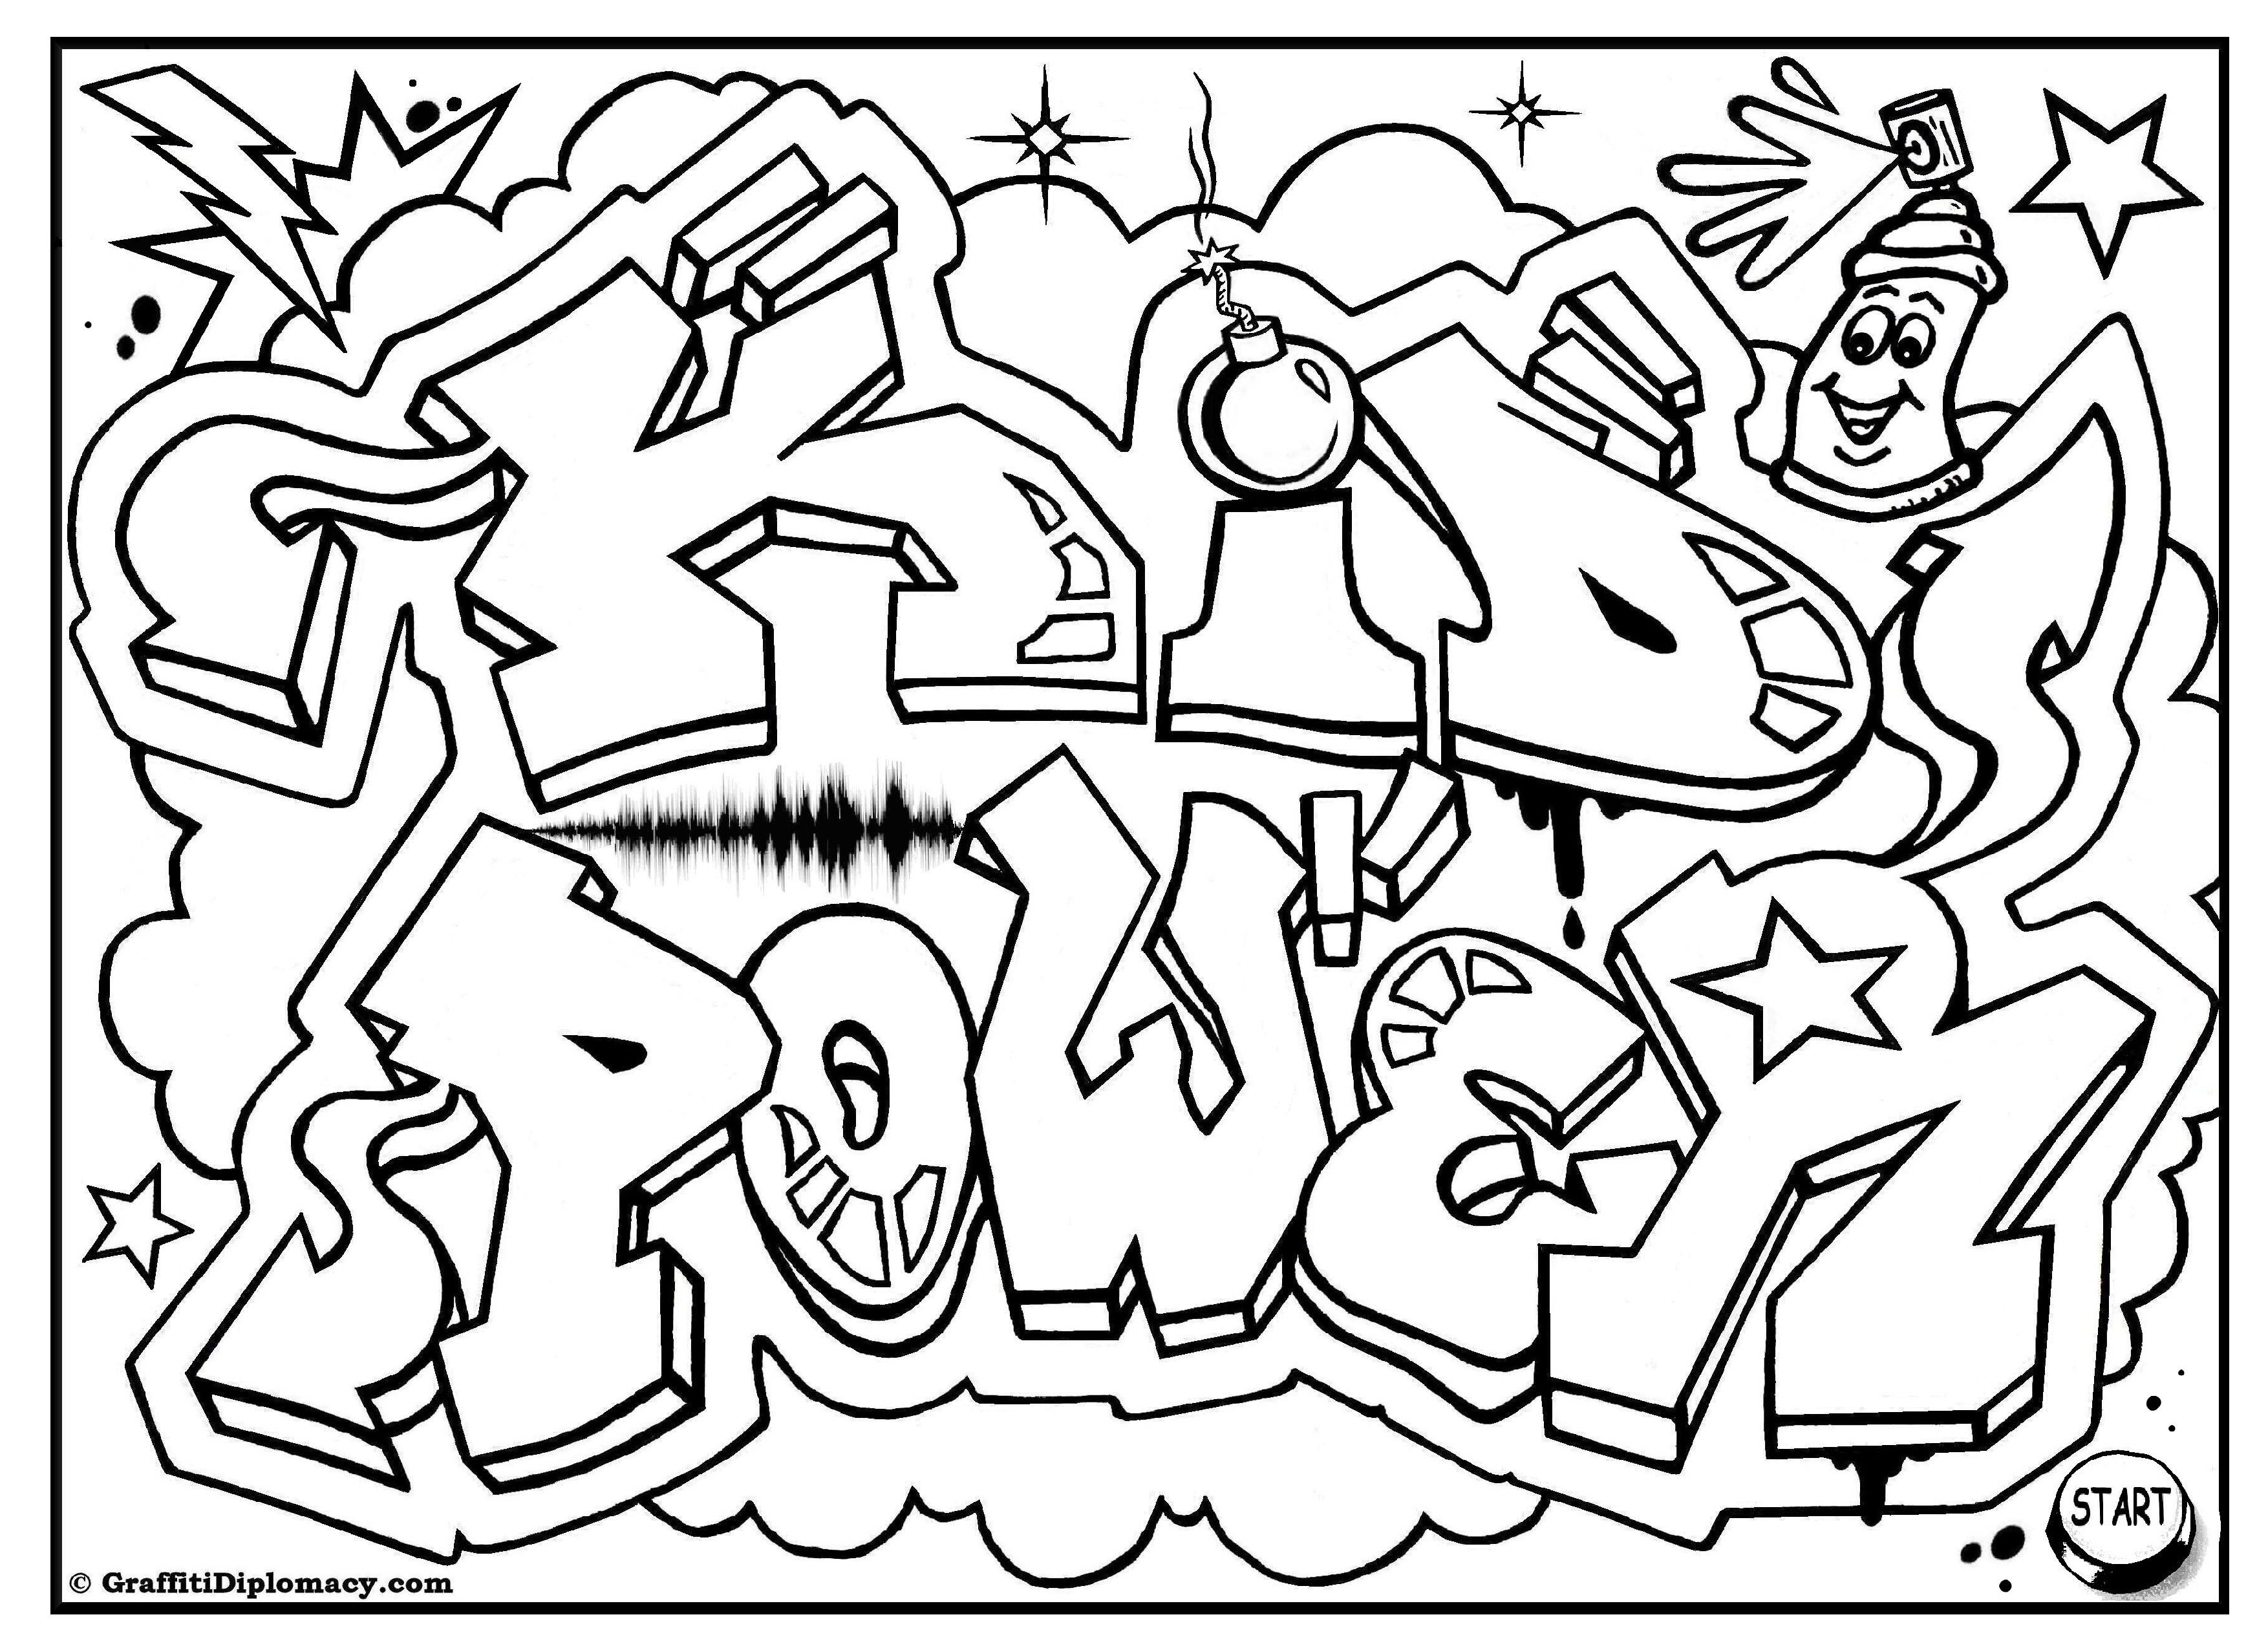 Graffiti Coloring Pages For Adults at GetColorings.com | Free printable